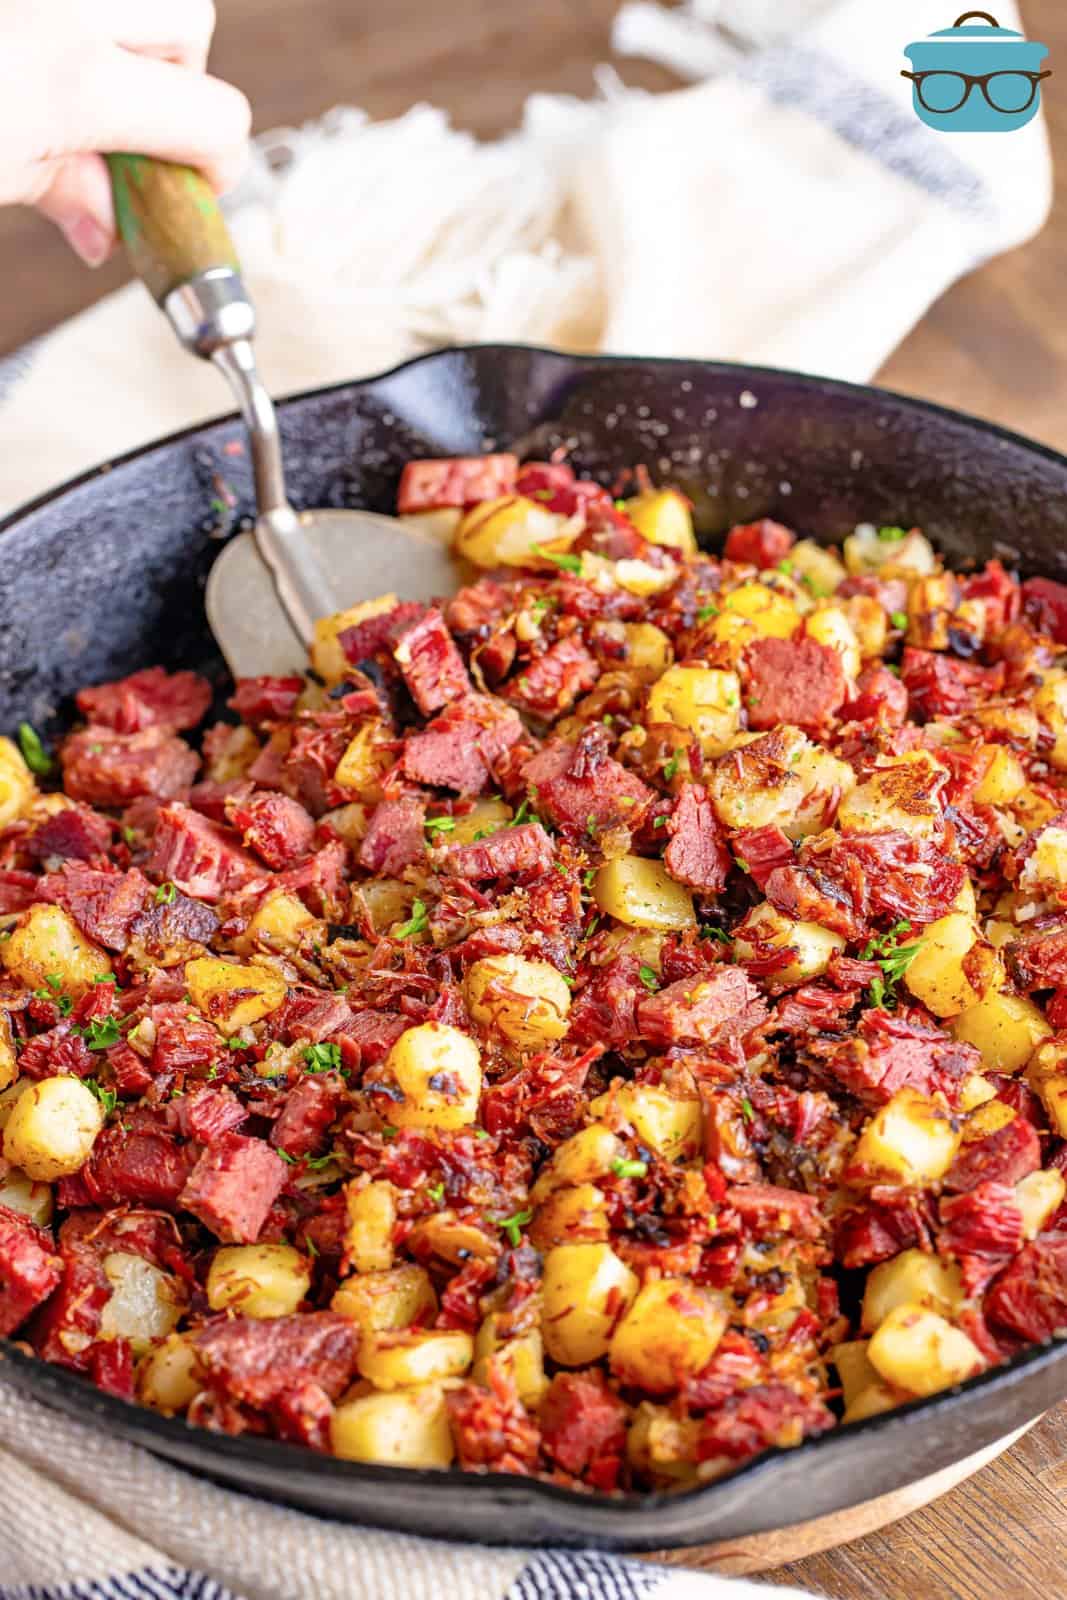 A skillet of homemade Corned Beef Hash.